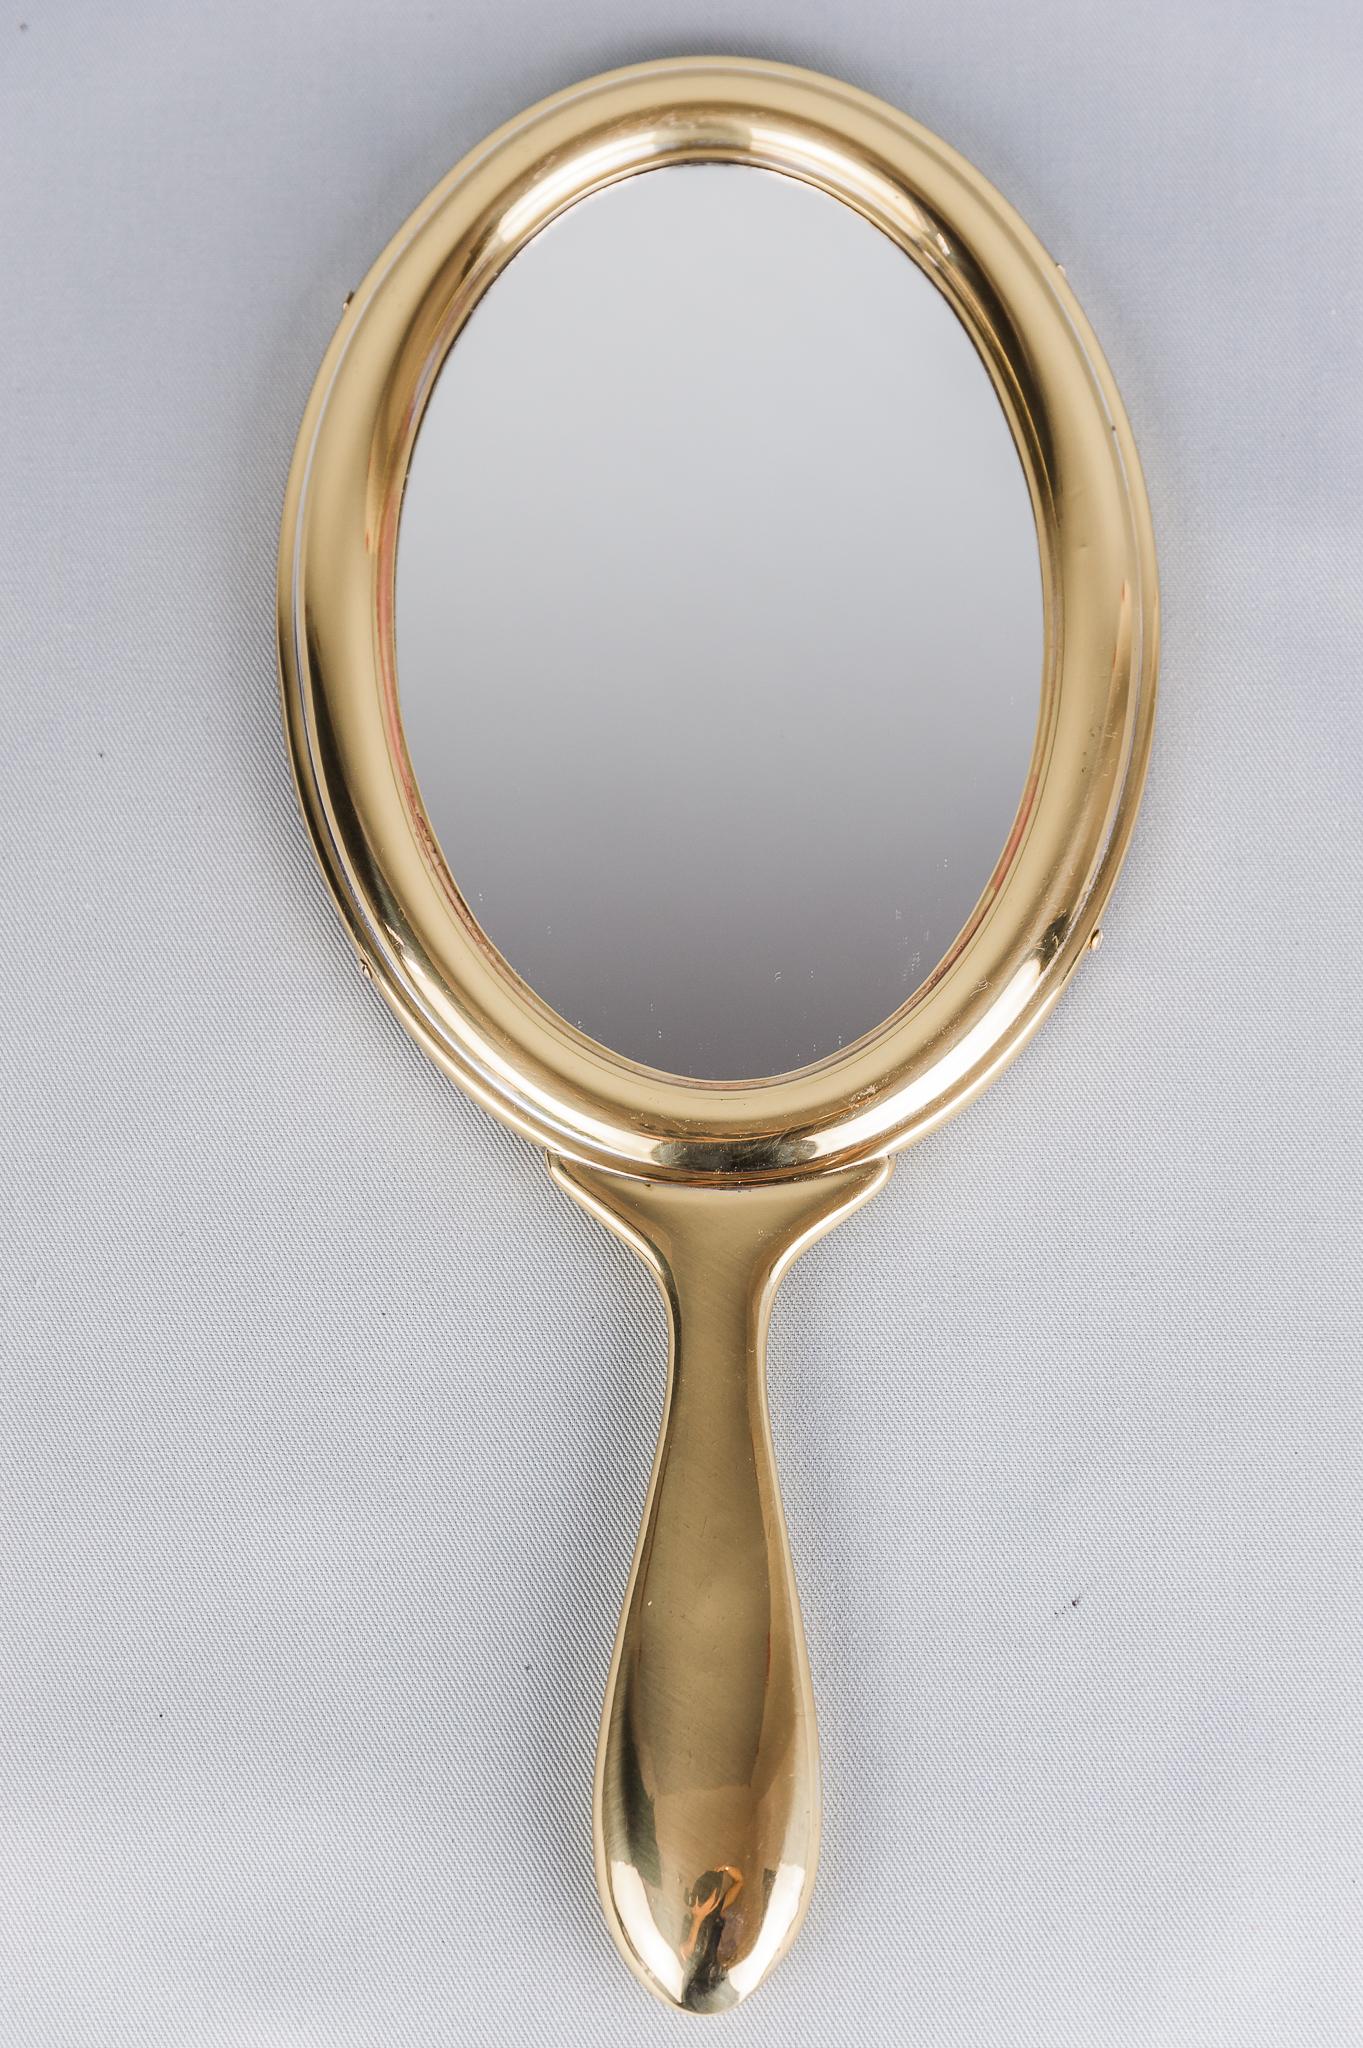 Brass hand mirror circa 1920s by Argentor
Polished.
 